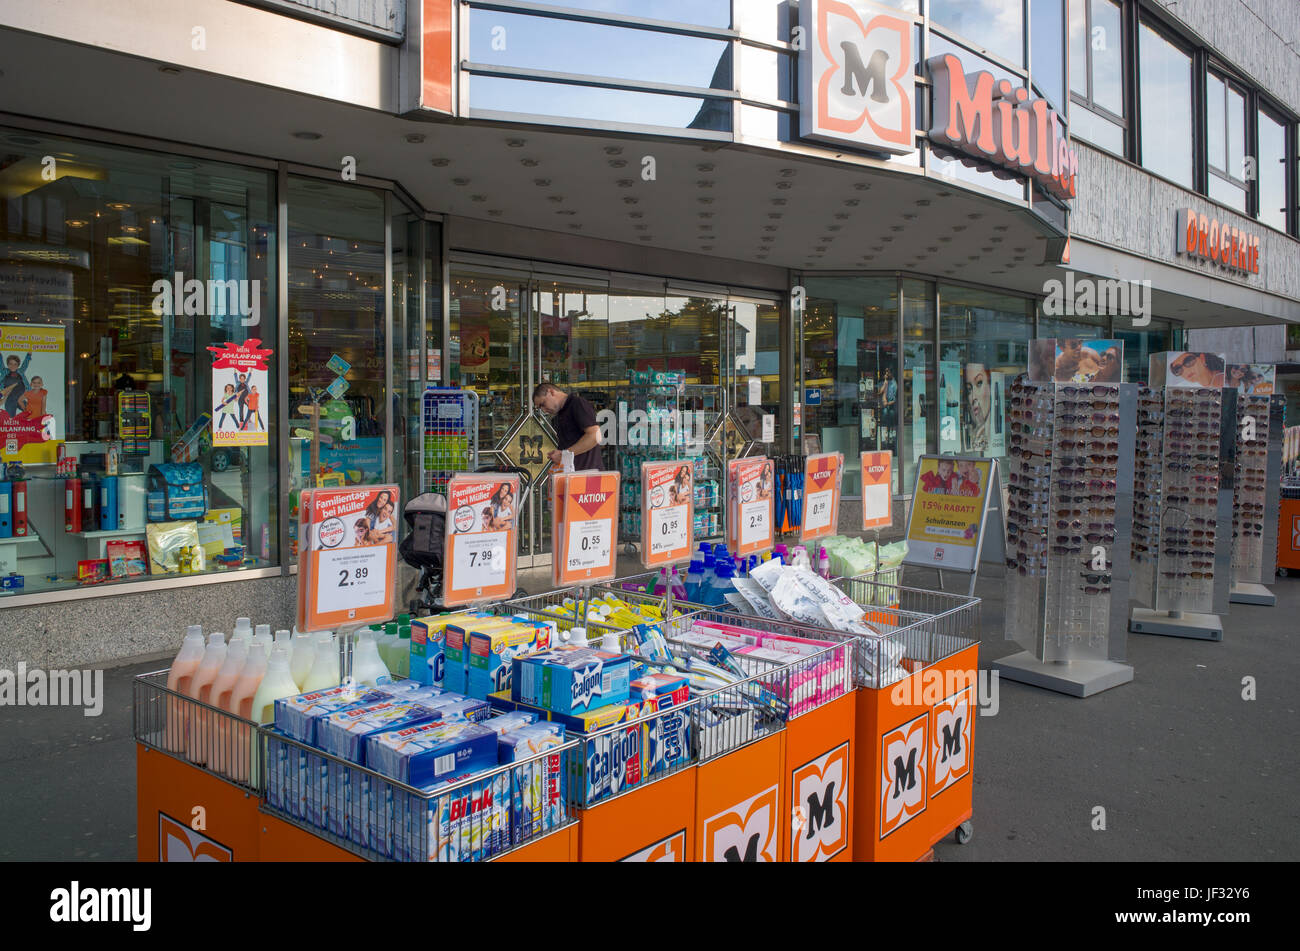 Cleaning and other household products on display in wire baskets outside branch of Müller, Wetzlar, Germany Stock Photo